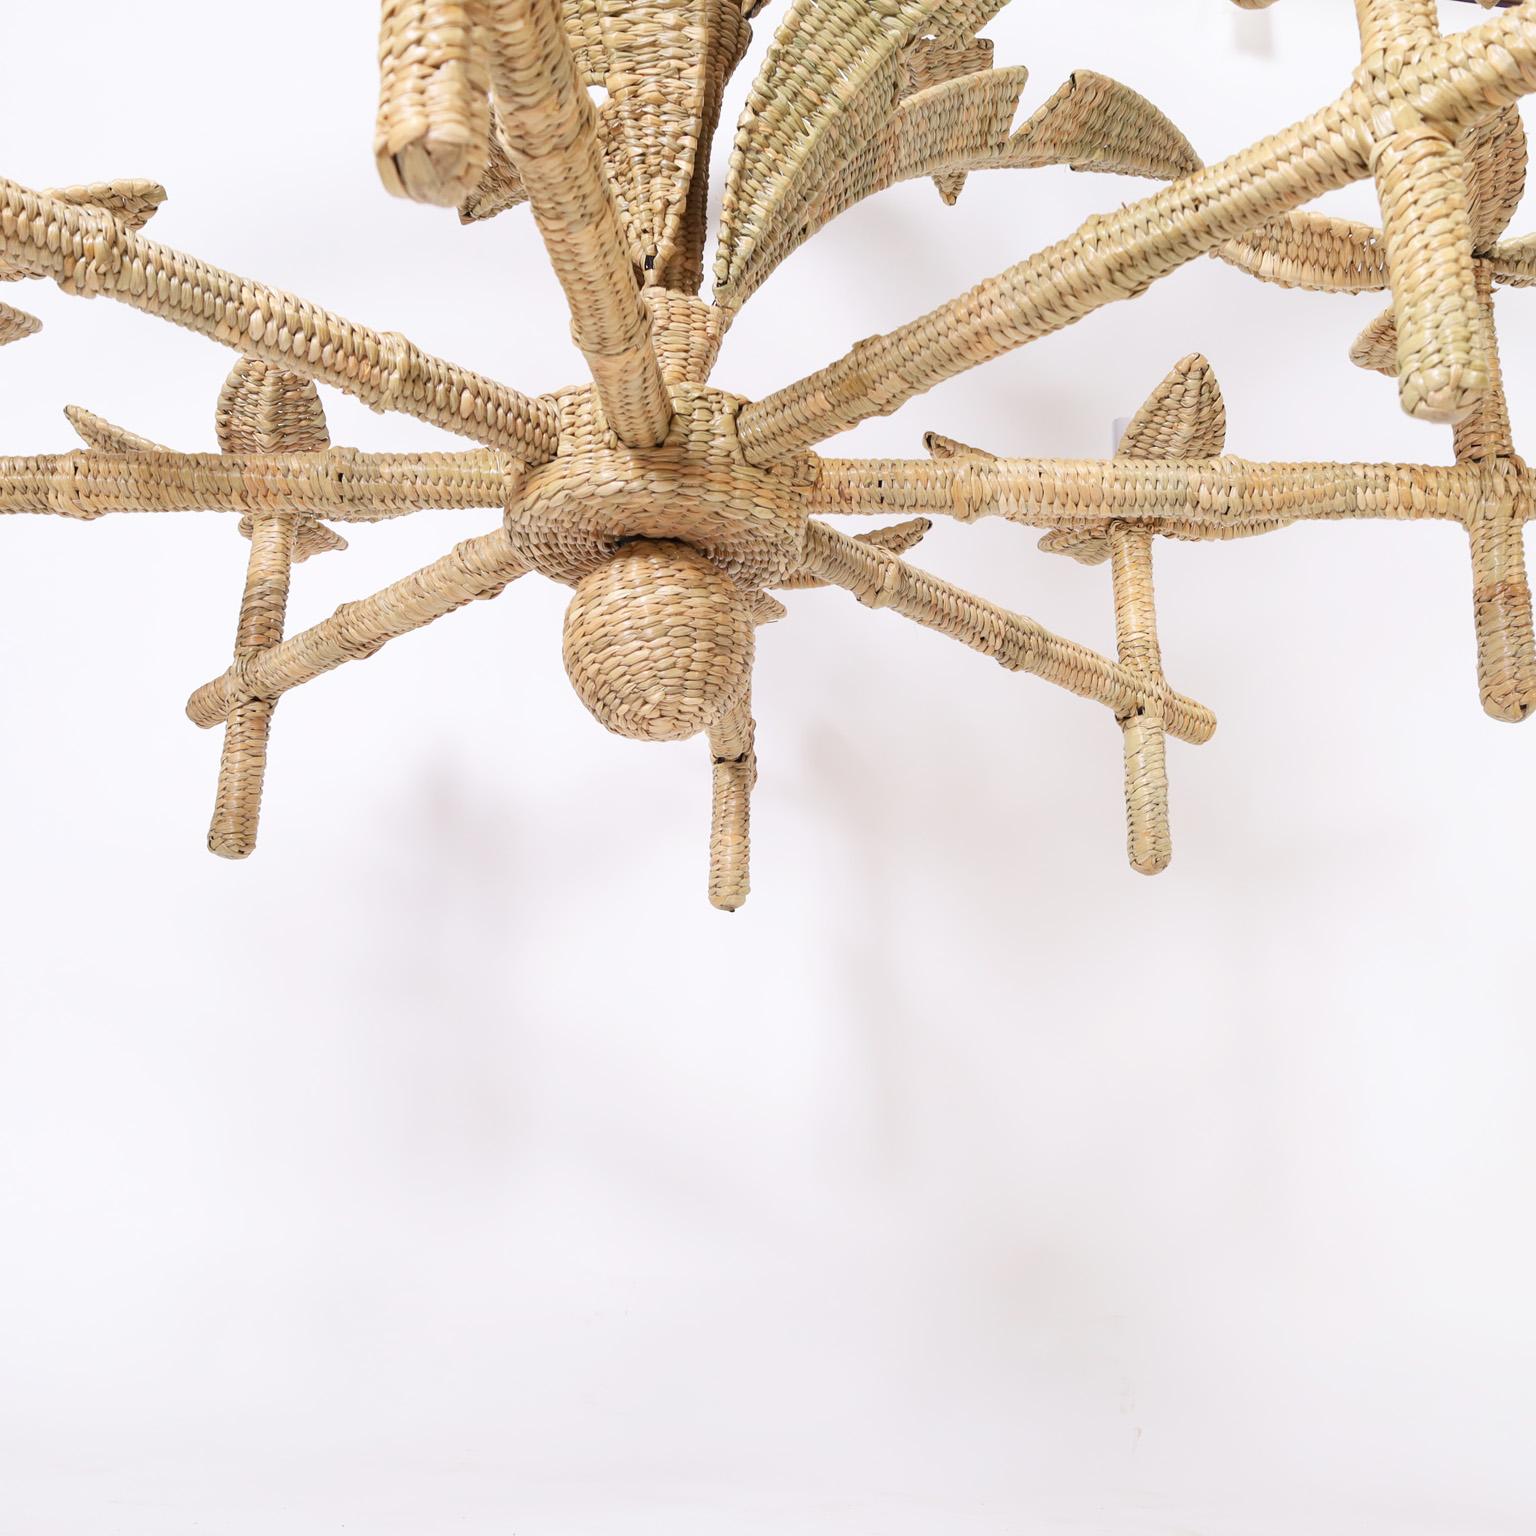 Contemporary Florencia Large Wicker Palm Leaf Chandelier from the FS Flores Collection For Sale